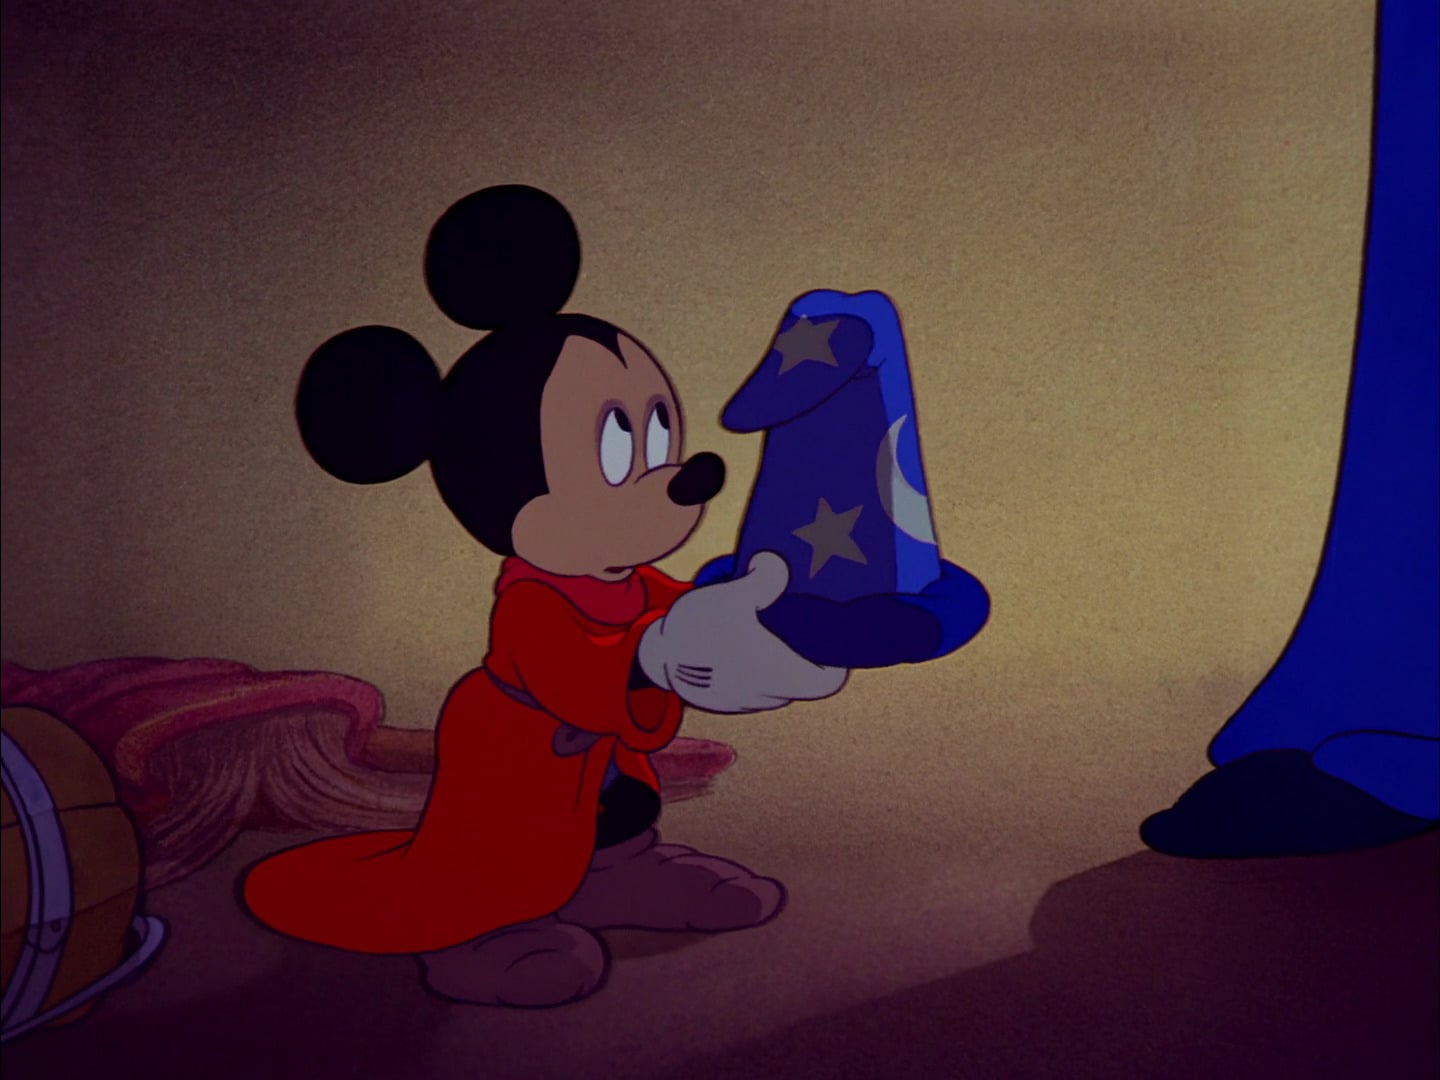 Prepare for the New Year With The Origin of Mickey Mouse